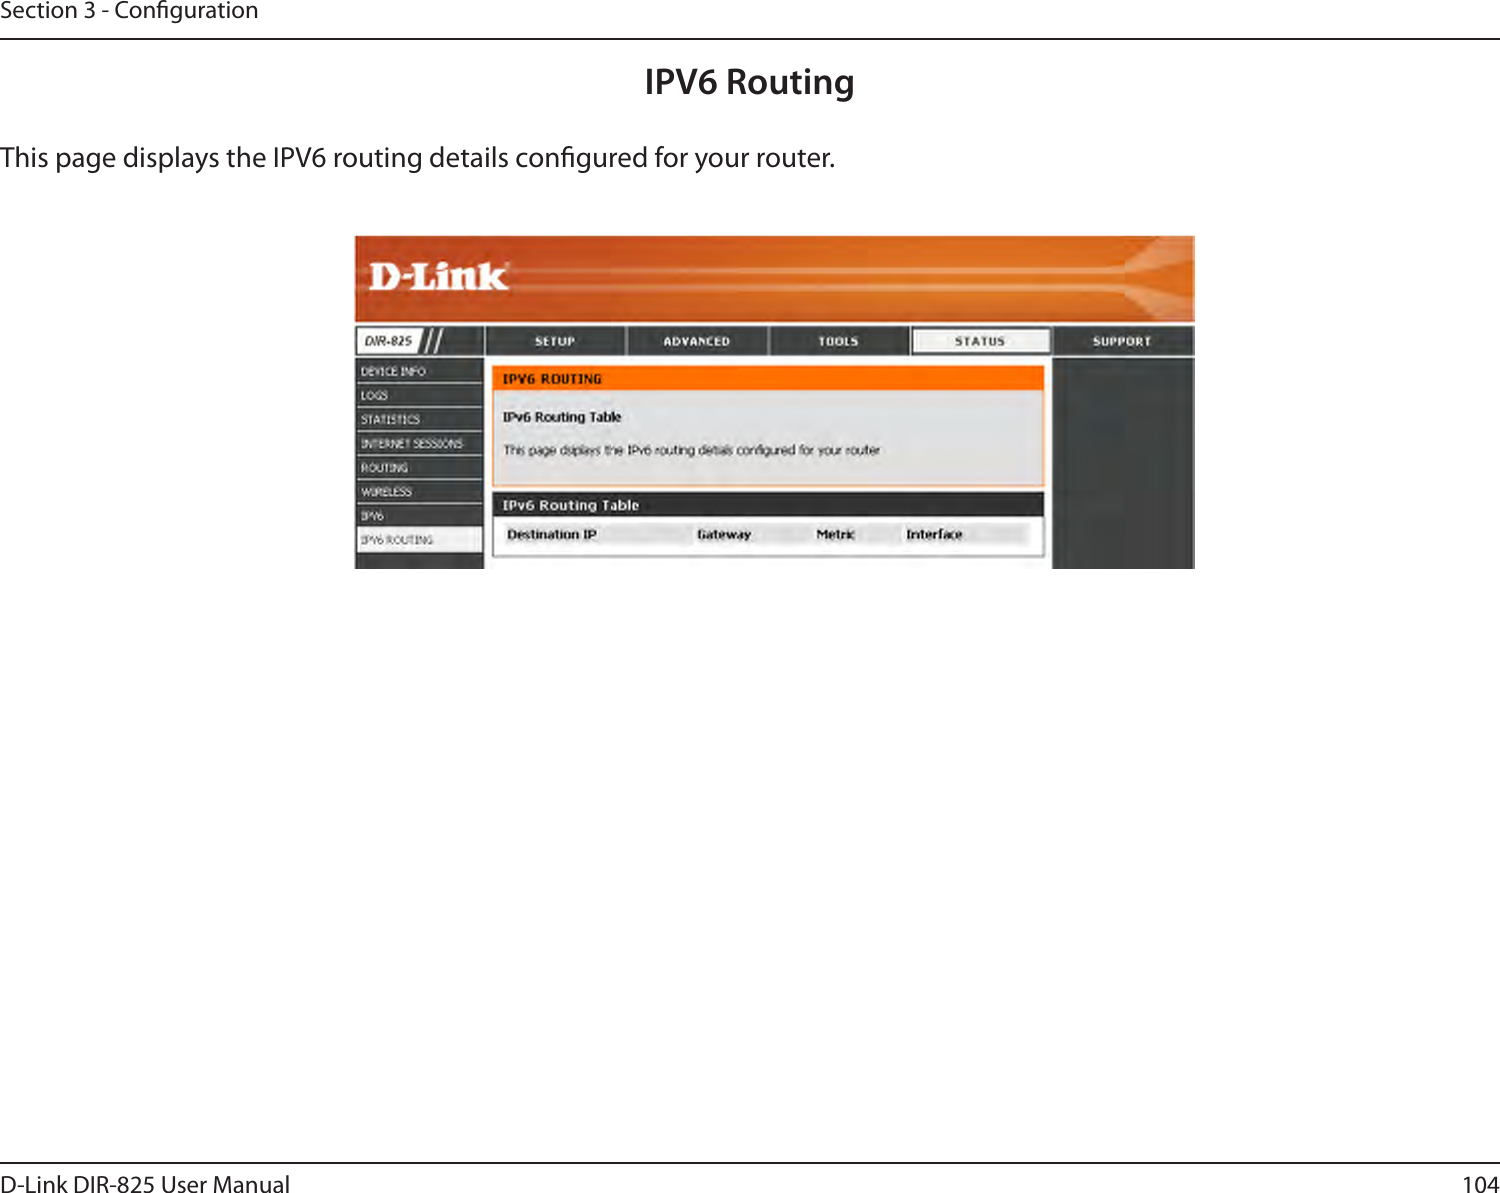 104D-Link DIR-825 User ManualSection 3 - CongurationIPV6 RoutingThis page displays the IPV6 routing details congured for your router. 